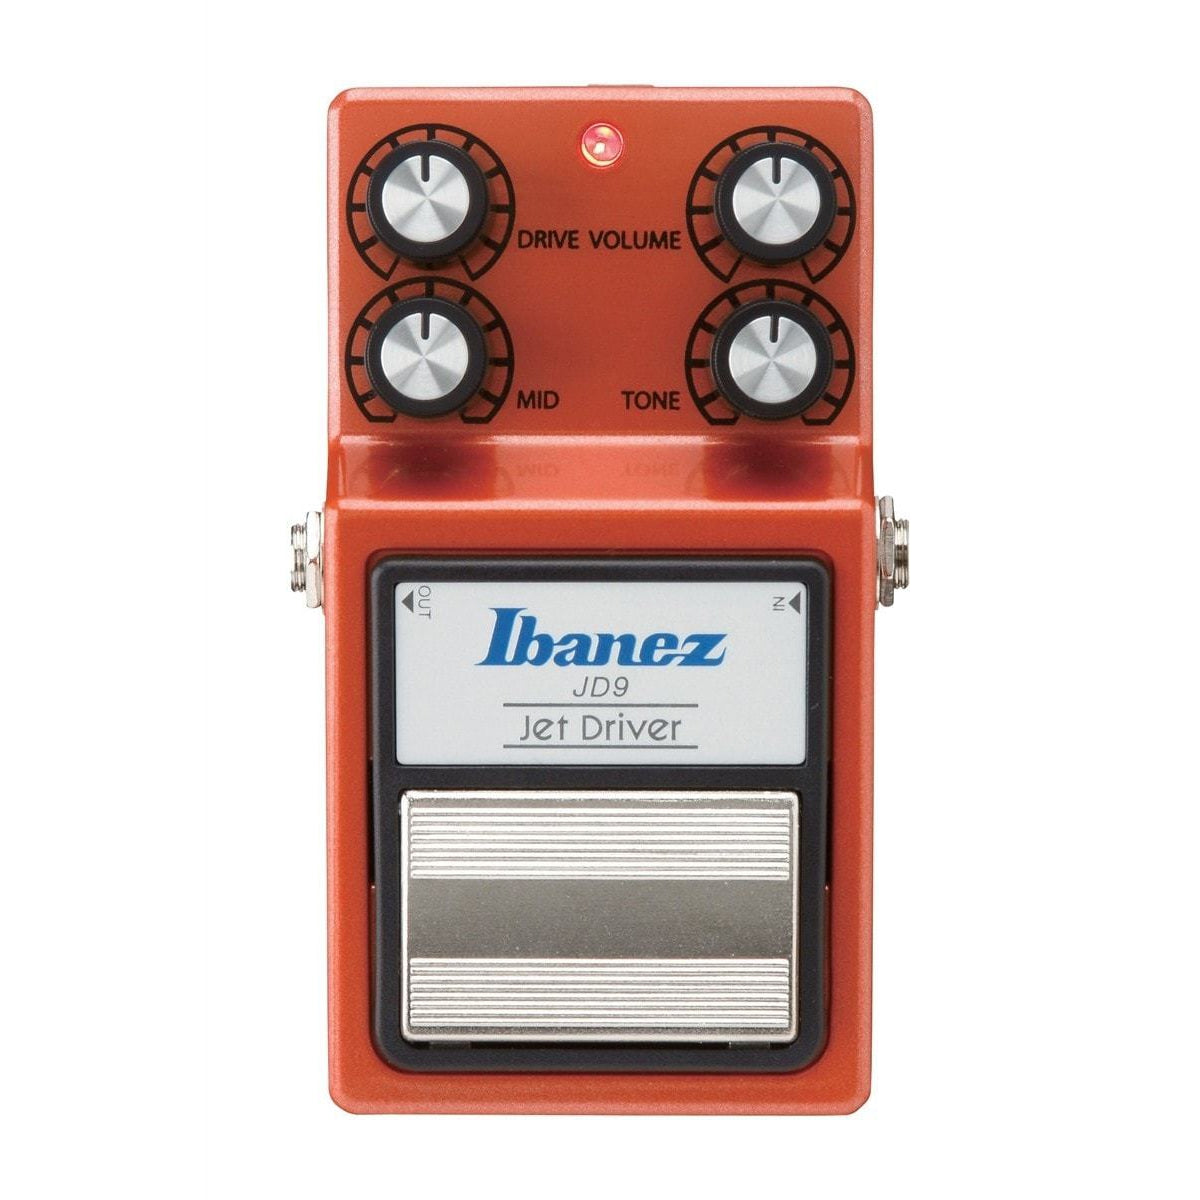 Ibanez JD9 Jet Driver Guitar Effects Pedal